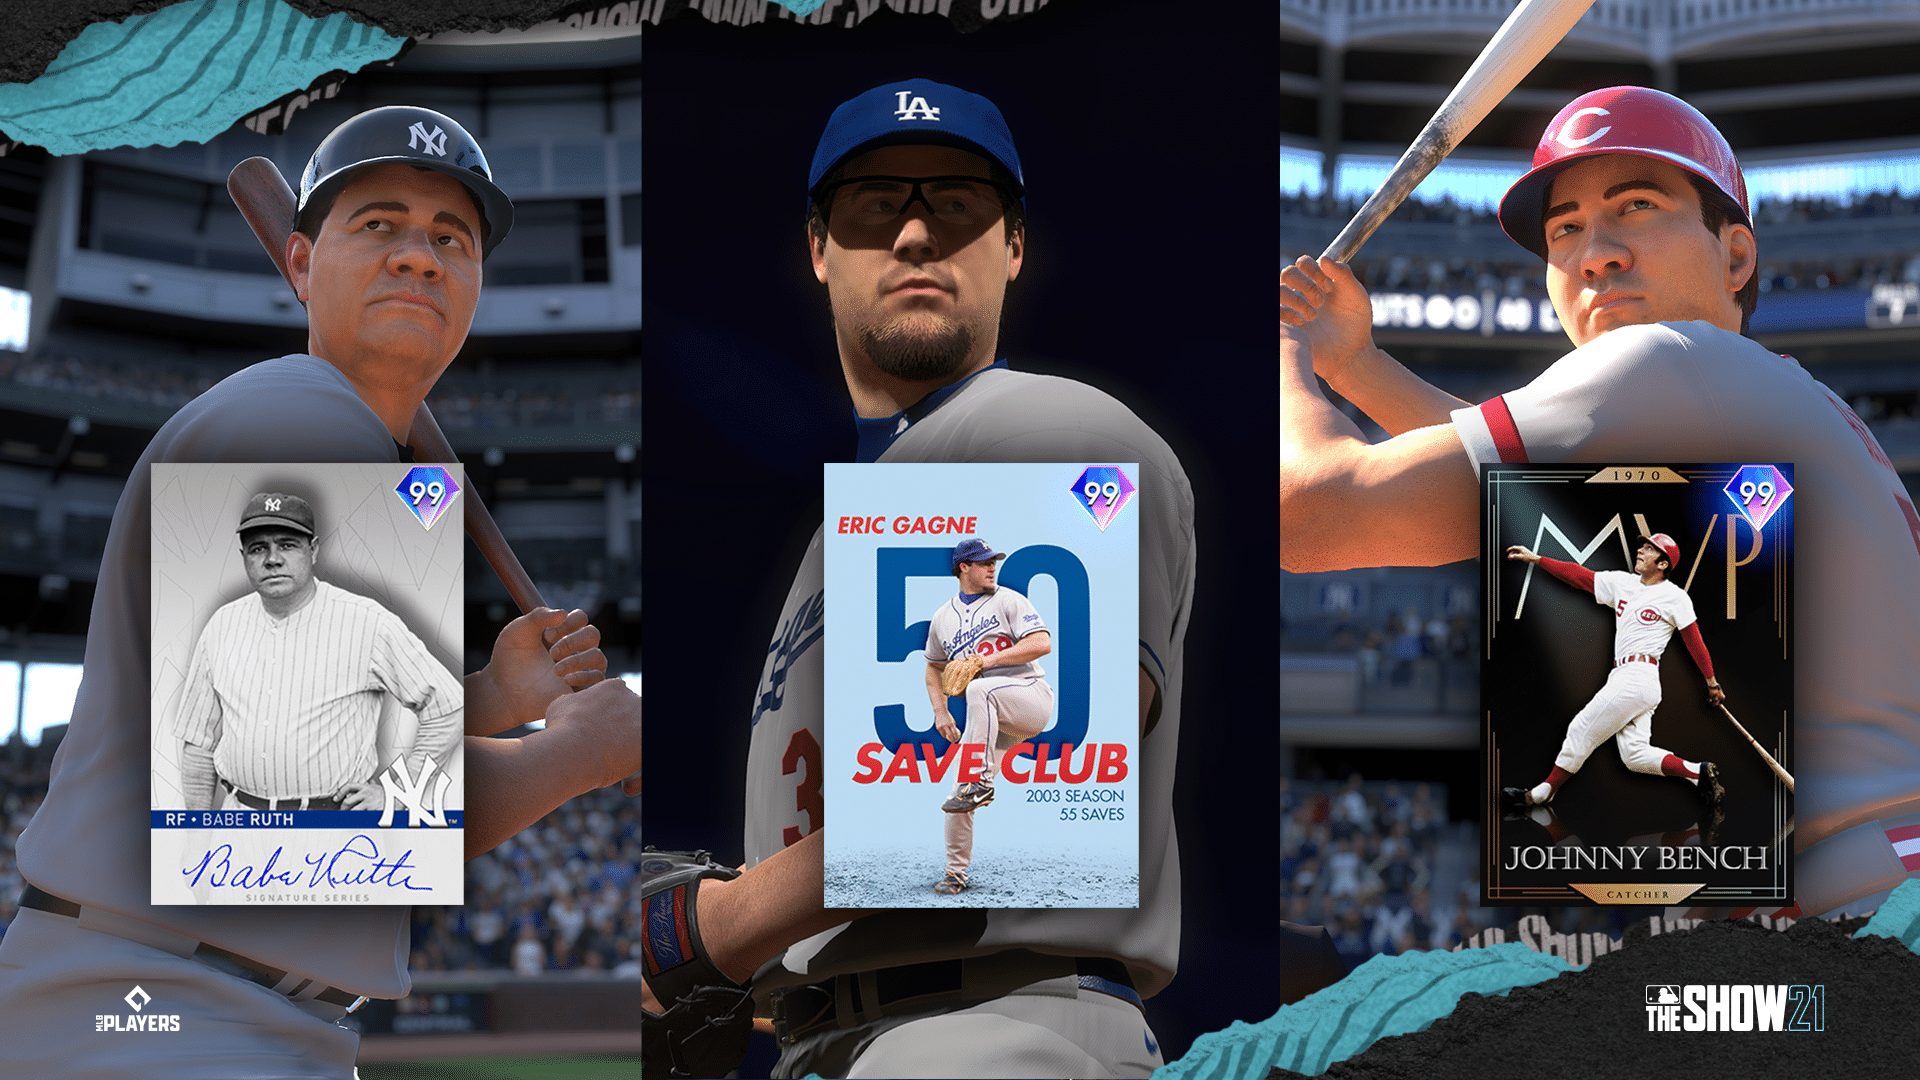 MLB® The Show™ - Gagne, Bench, & The Babe Make A Grand Entrance